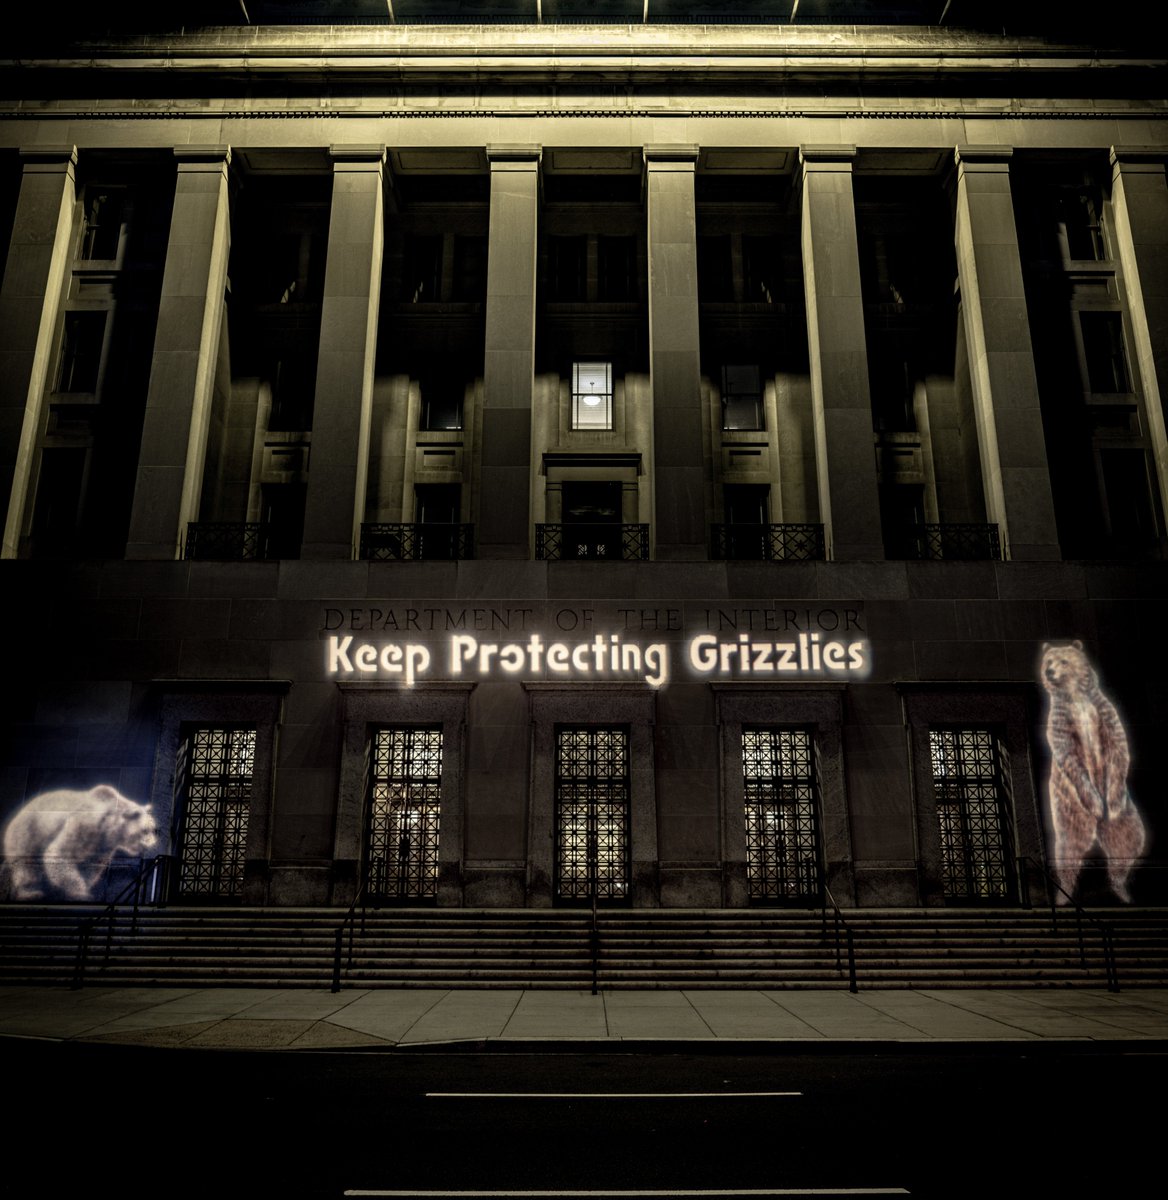 BREAKING: Grizzly Bear Activists Light up @Interior, Deliver 100,000 Petition Signatures asking @SecDebHaaland and @USFWS to maintain #EndangeredSpeciesAct protections for grizzly bears: endangered.org/breaking-grizz…